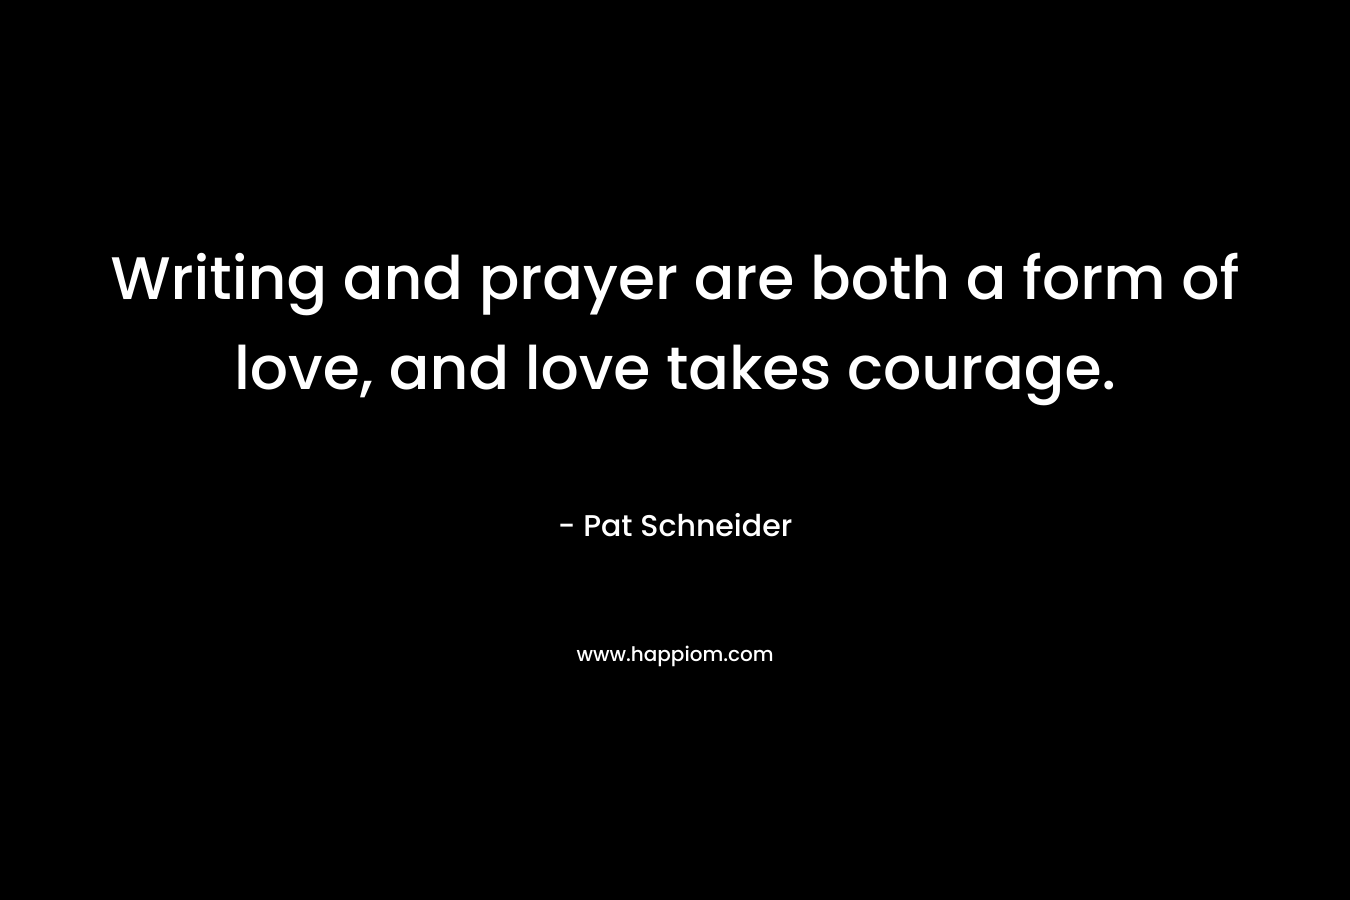 Writing and prayer are both a form of love, and love takes courage.